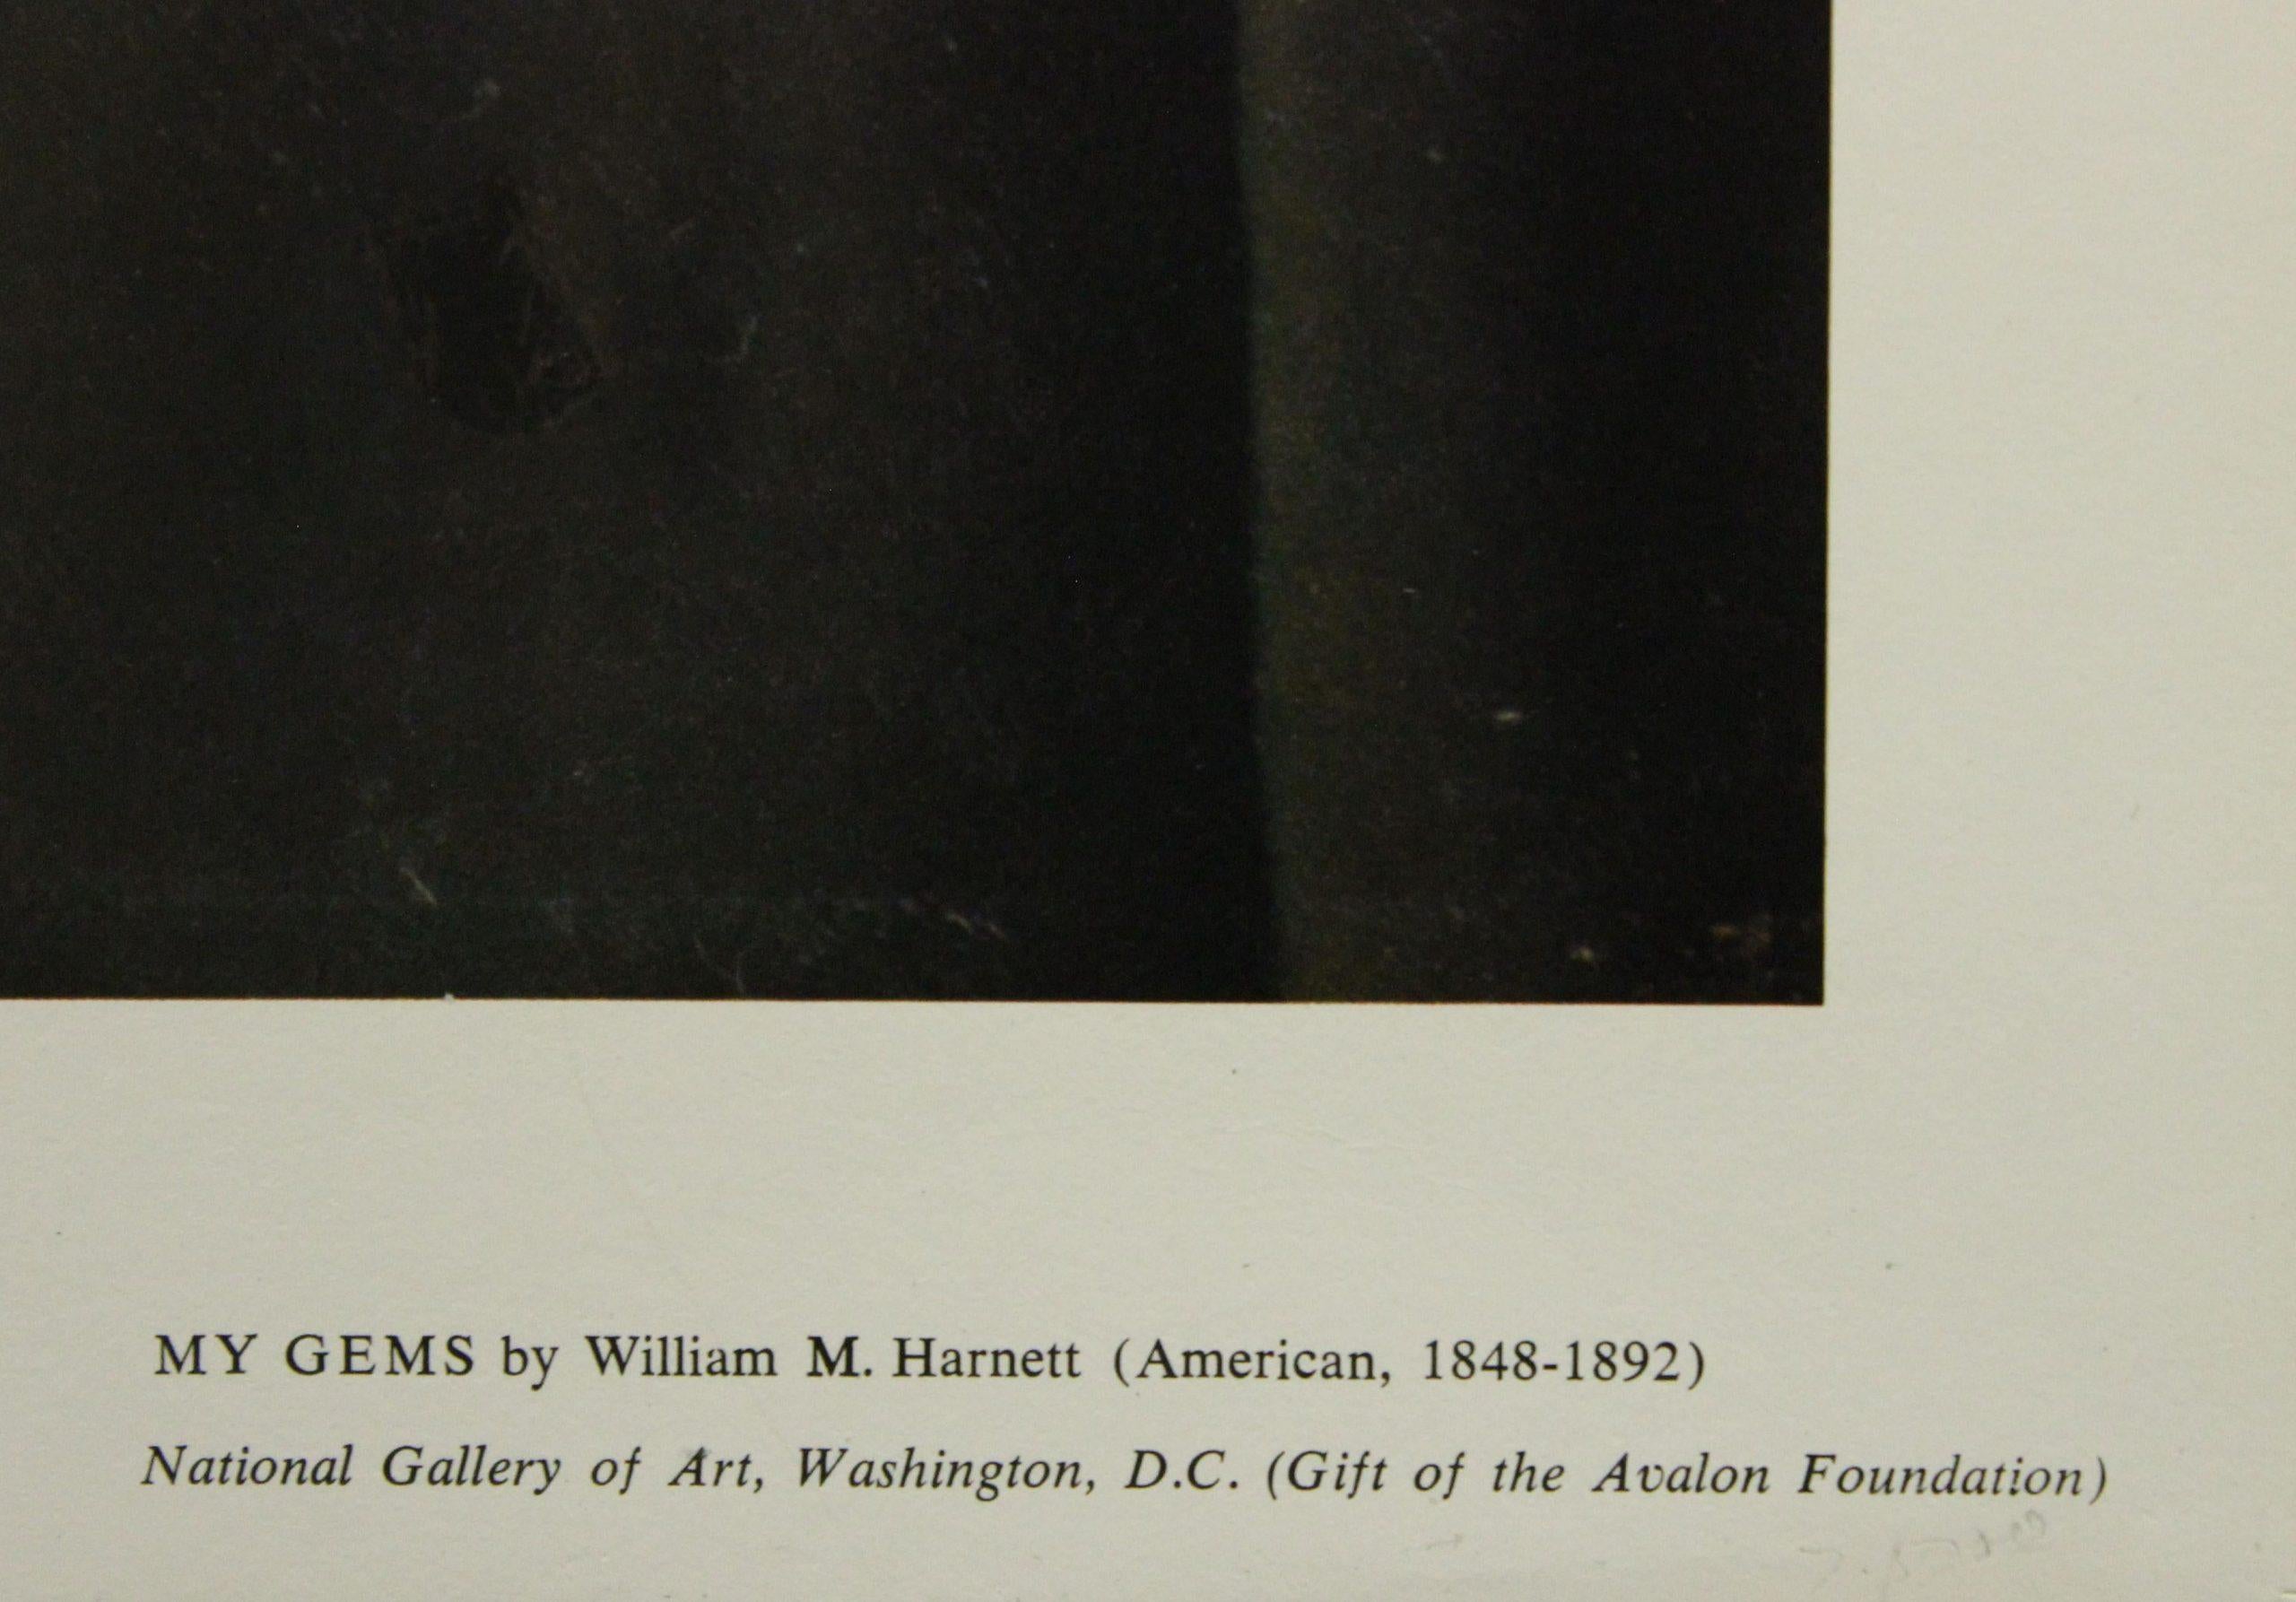 My Gems-Abrams Color Print. Printed in the Netherlands - Black Still-Life Print by William M. Harnett